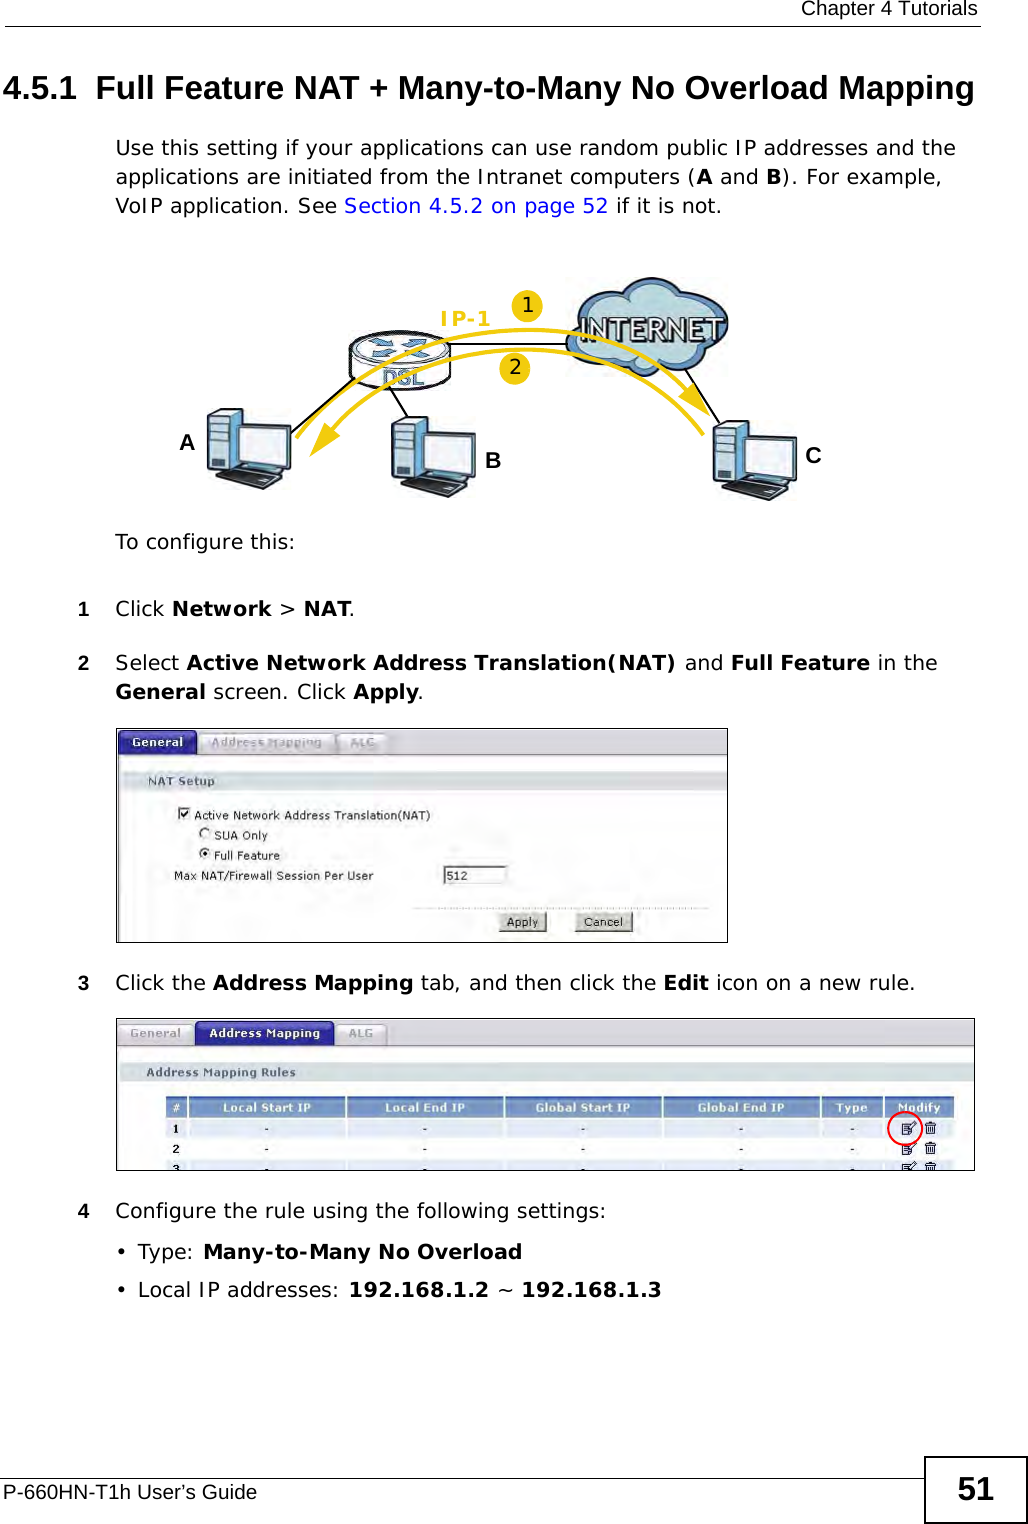  Chapter 4 TutorialsP-660HN-T1h User’s Guide 514.5.1  Full Feature NAT + Many-to-Many No Overload MappingUse this setting if your applications can use random public IP addresses and the applications are initiated from the Intranet computers (A and B). For example, VoIP application. See Section 4.5.2 on page 52 if it is not.To configure this:1Click Network &gt; NAT.2Select Active Network Address Translation(NAT) and Full Feature in the General screen. Click Apply.3Click the Address Mapping tab, and then click the Edit icon on a new rule.4Configure the rule using the following settings:•Type: Many-to-Many No Overload• Local IP addresses: 192.168.1.2 ~ 192.168.1.3ABIP-1C12